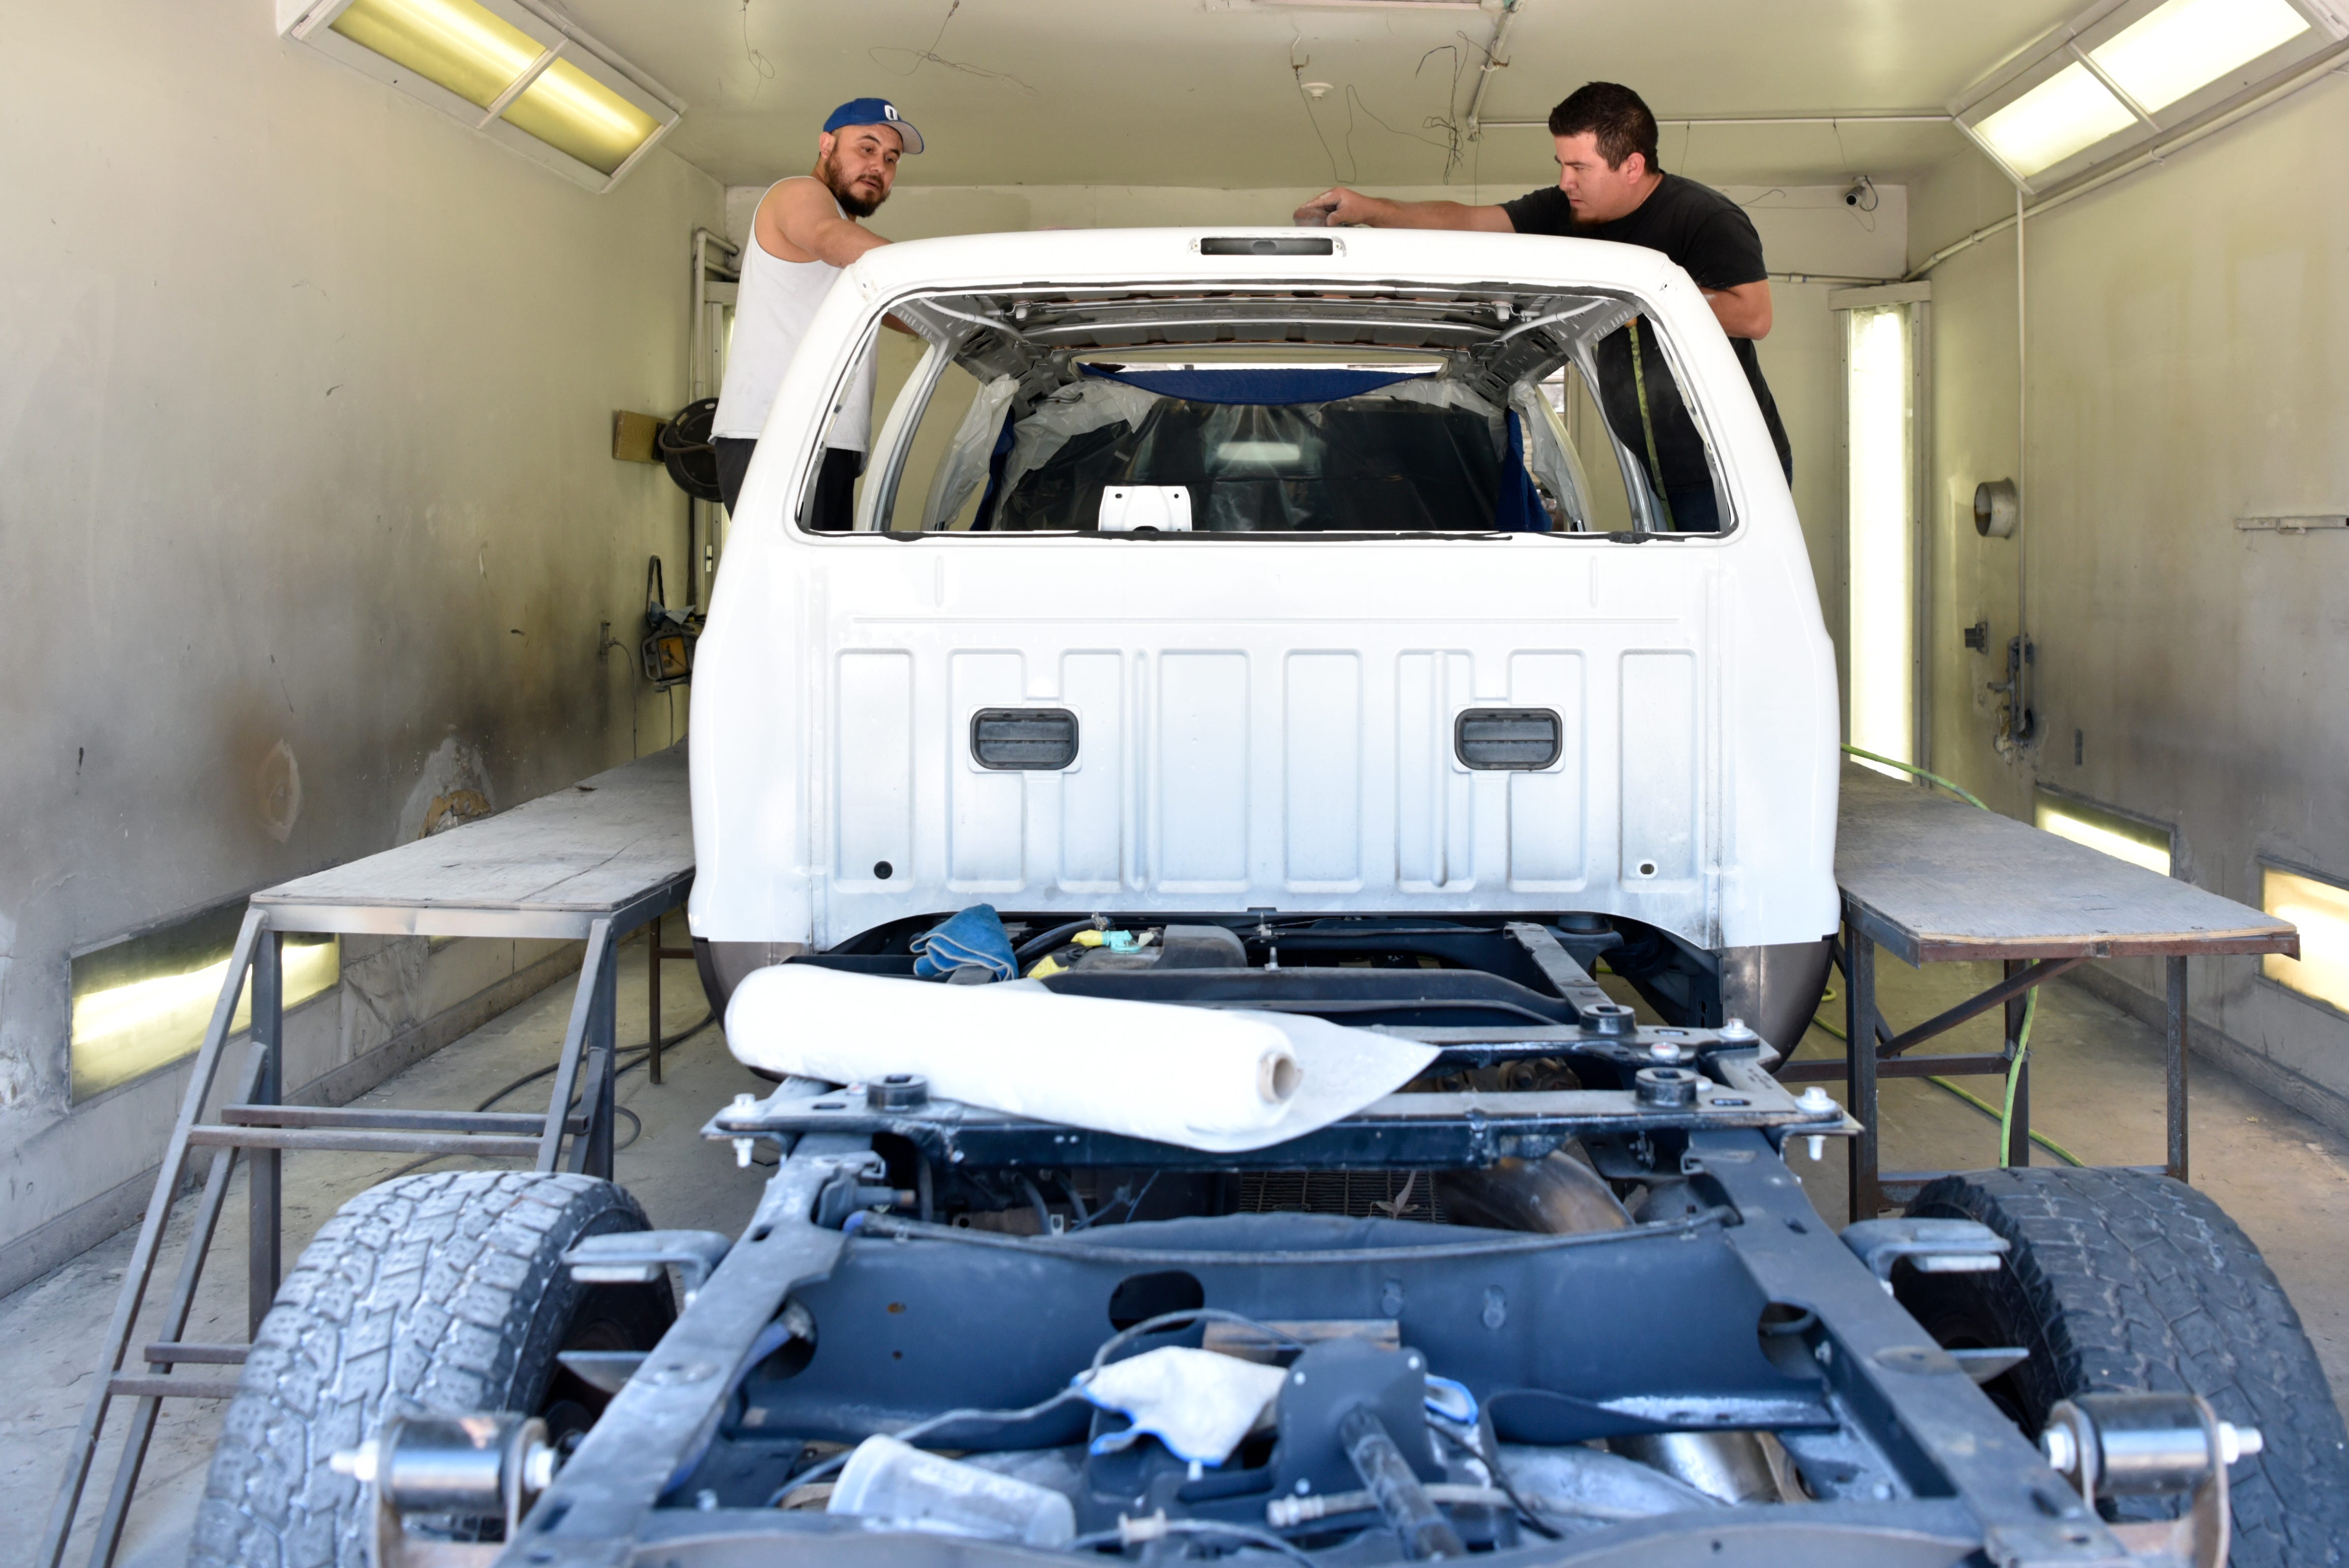 Ulises Rivera, left, and Edwin Ramirez prepare a custom built Ford Excursion for paint at Custom Autos By Tim in Guthrie, Oklahoma on April 26, 2019.